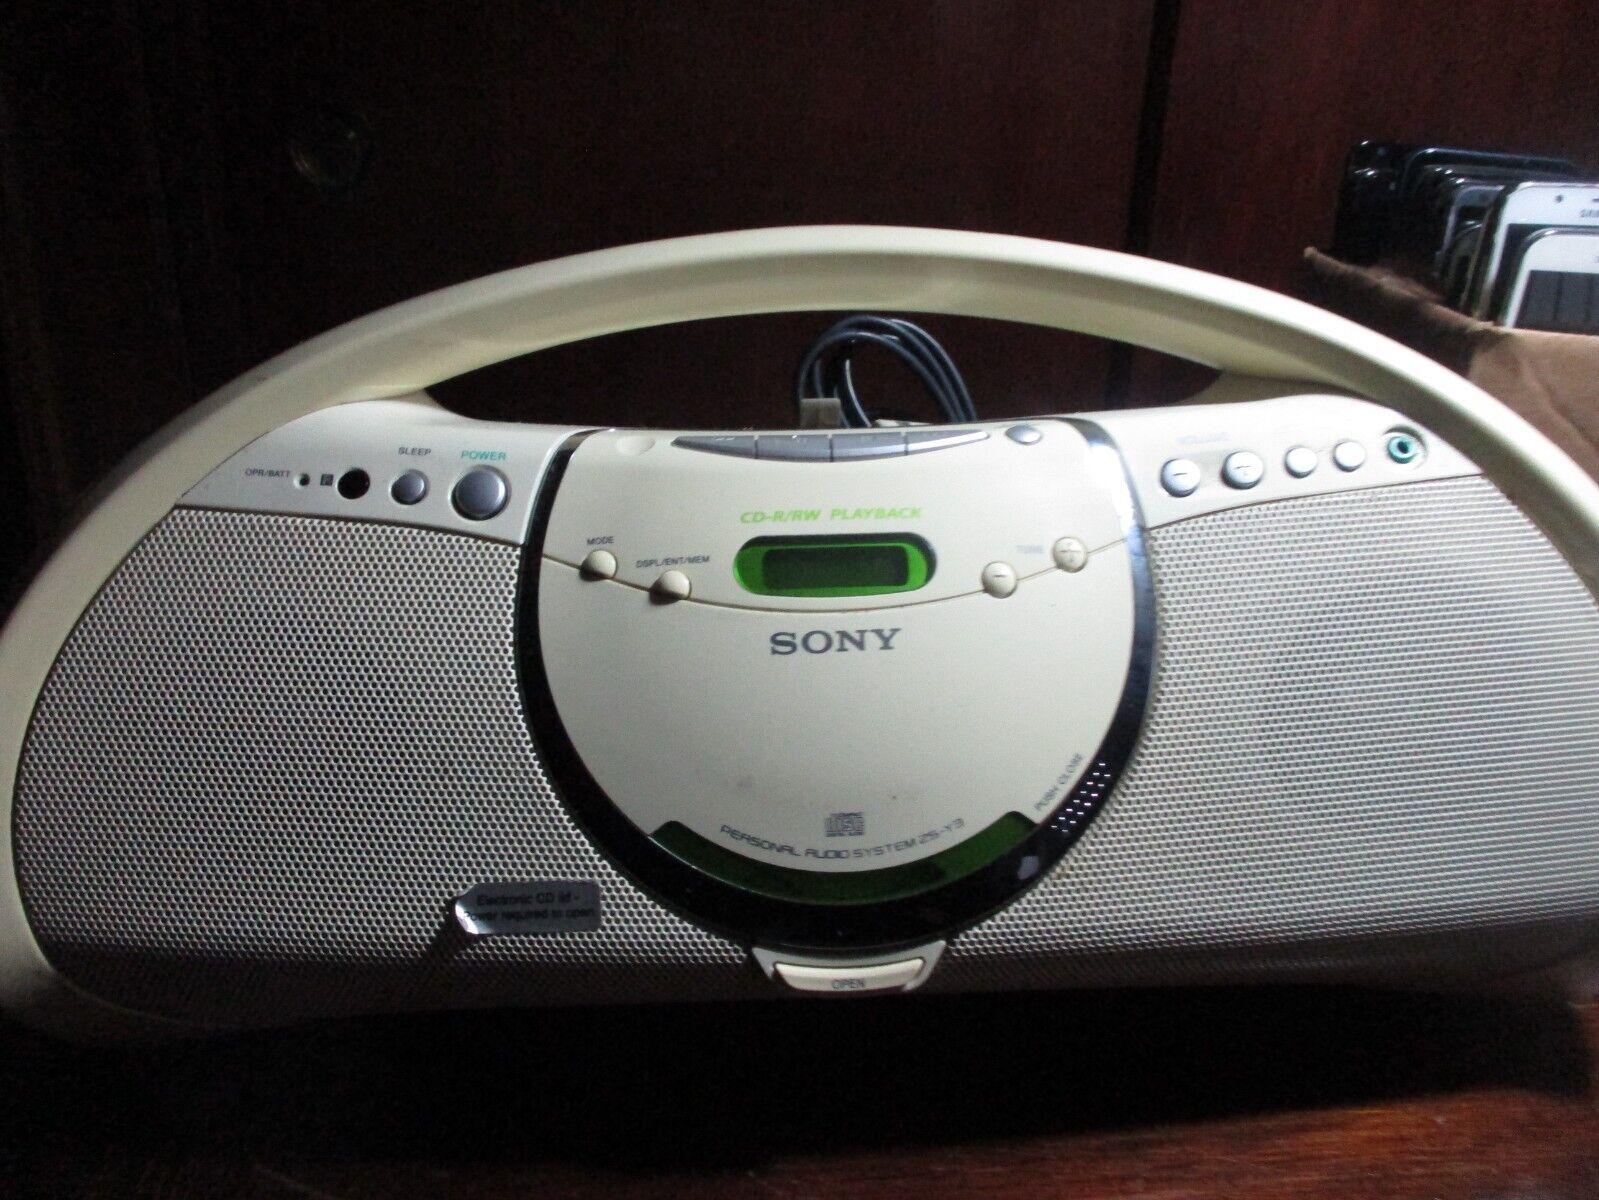 Sony ZS-Y3 CD/Radio Boombox for sale online | eBay